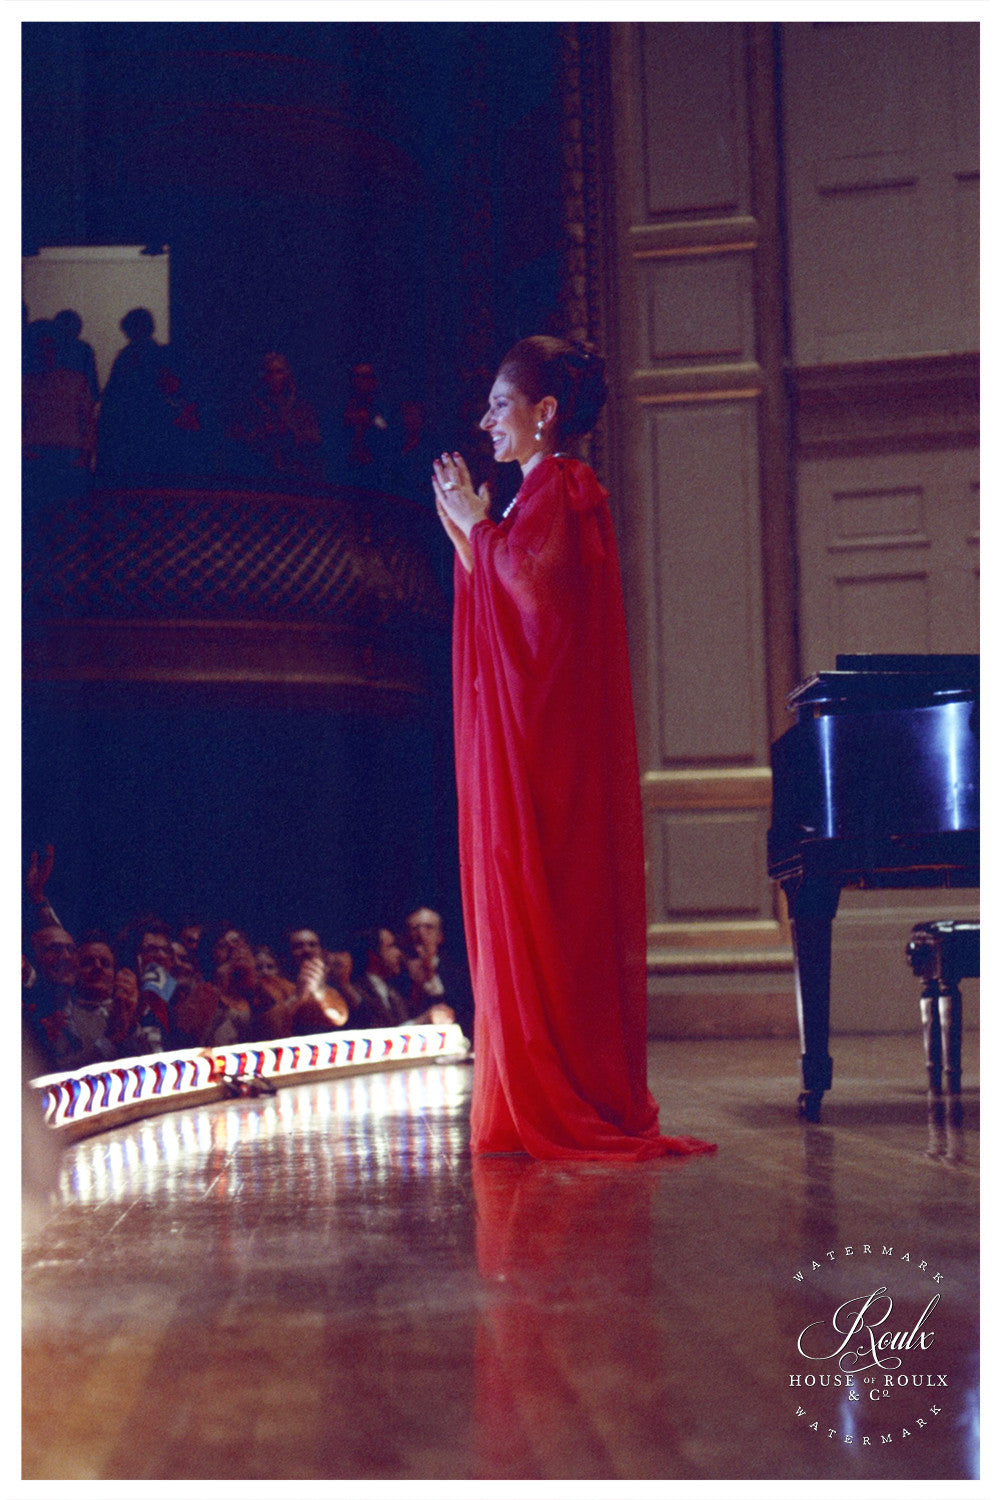 Maria Callas (by Peter Warrack) - Limited Edition, Archival Print